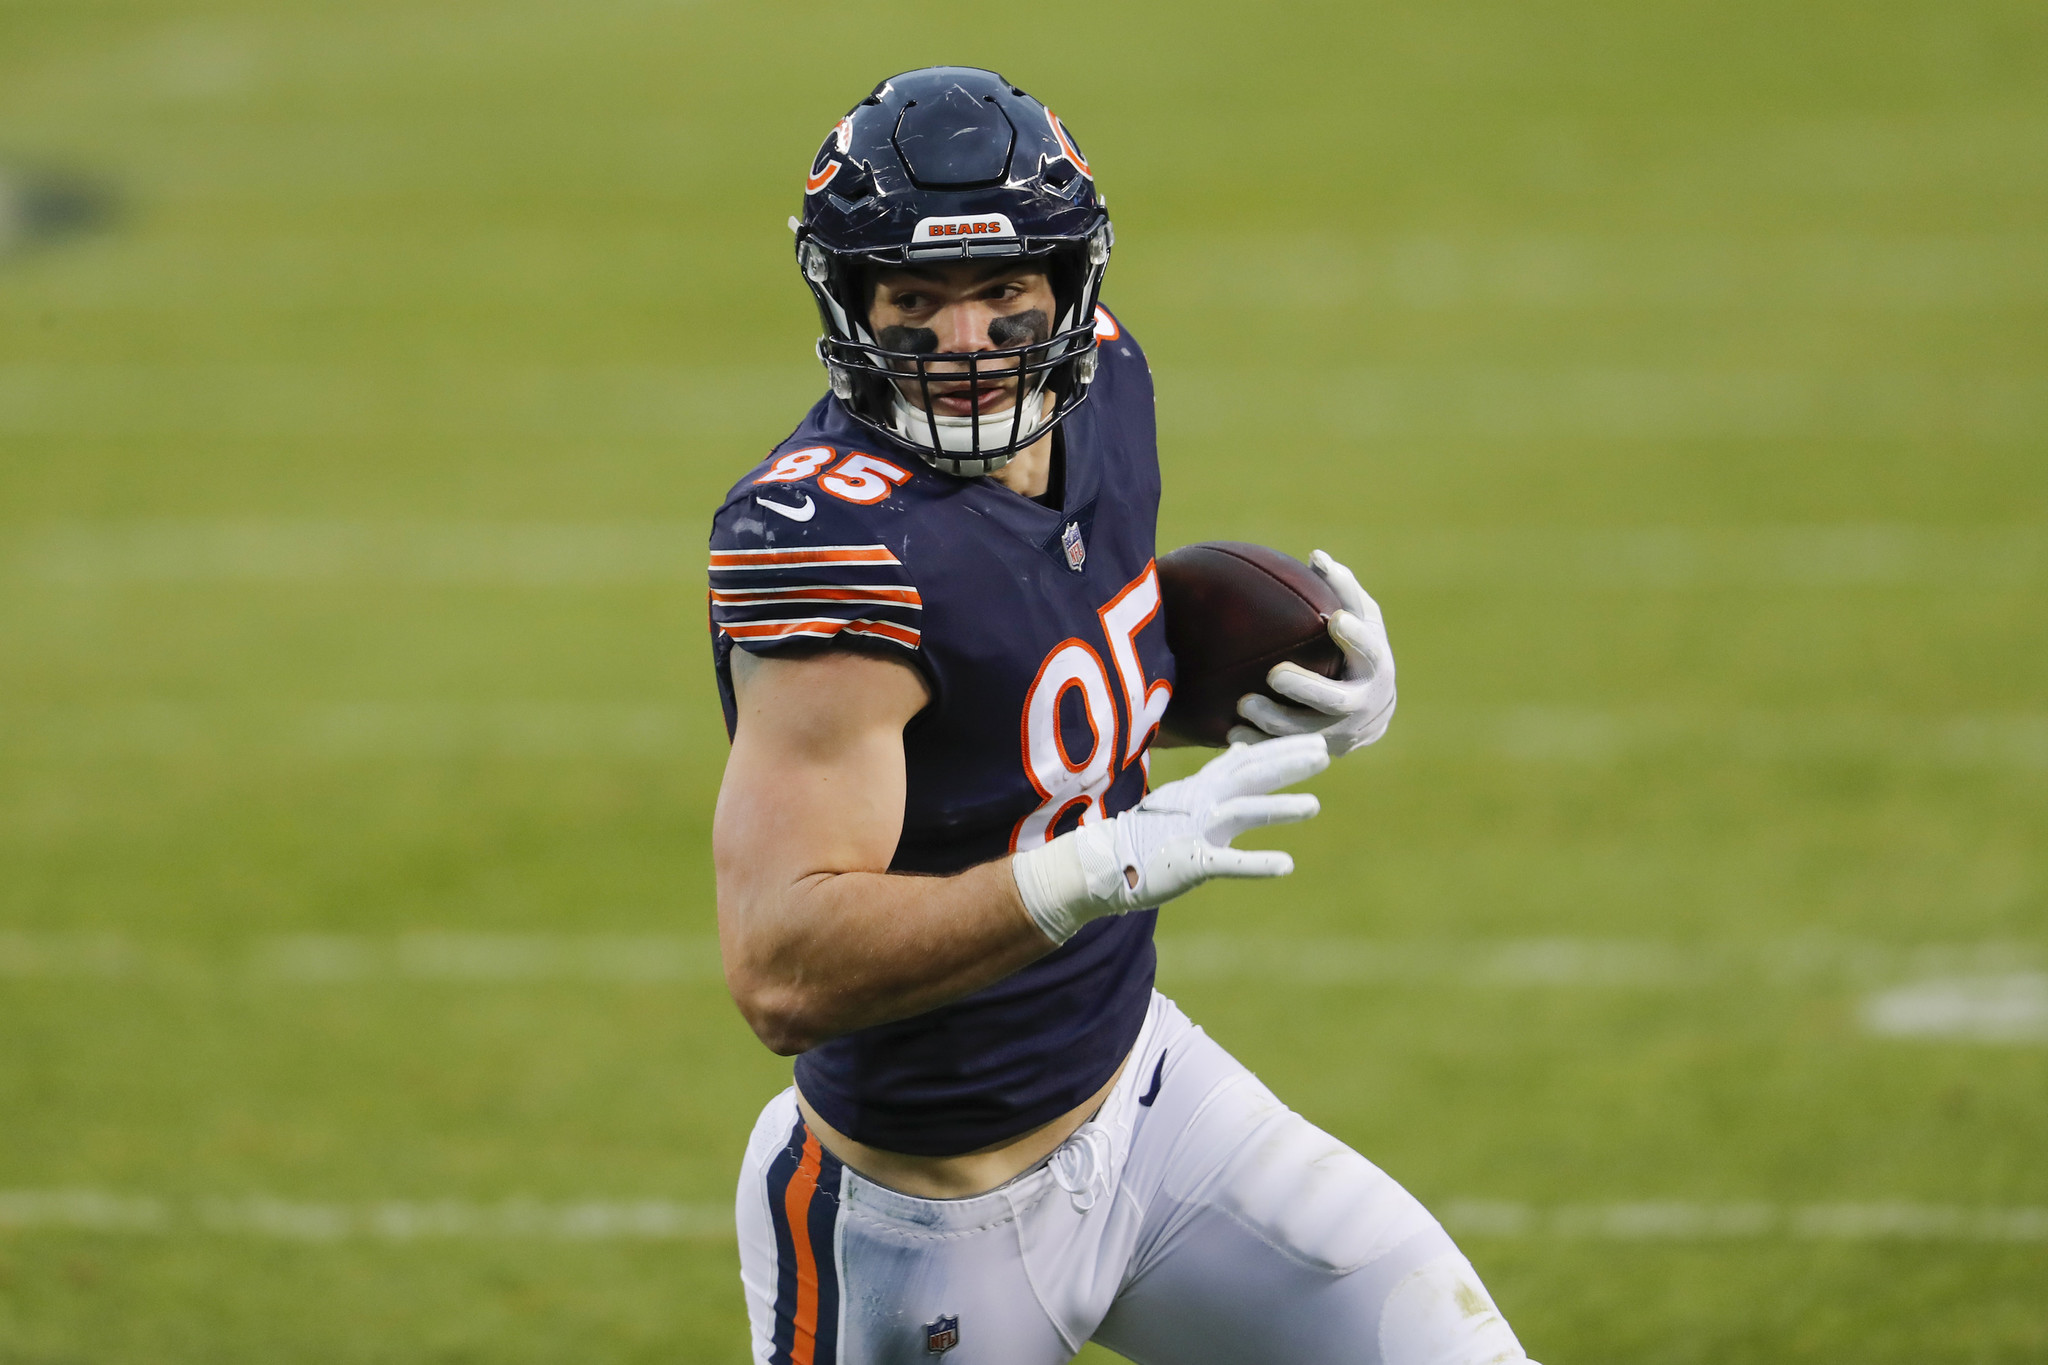 Bears tight end Jimmy Graham needs a good QB more than a 'hungry